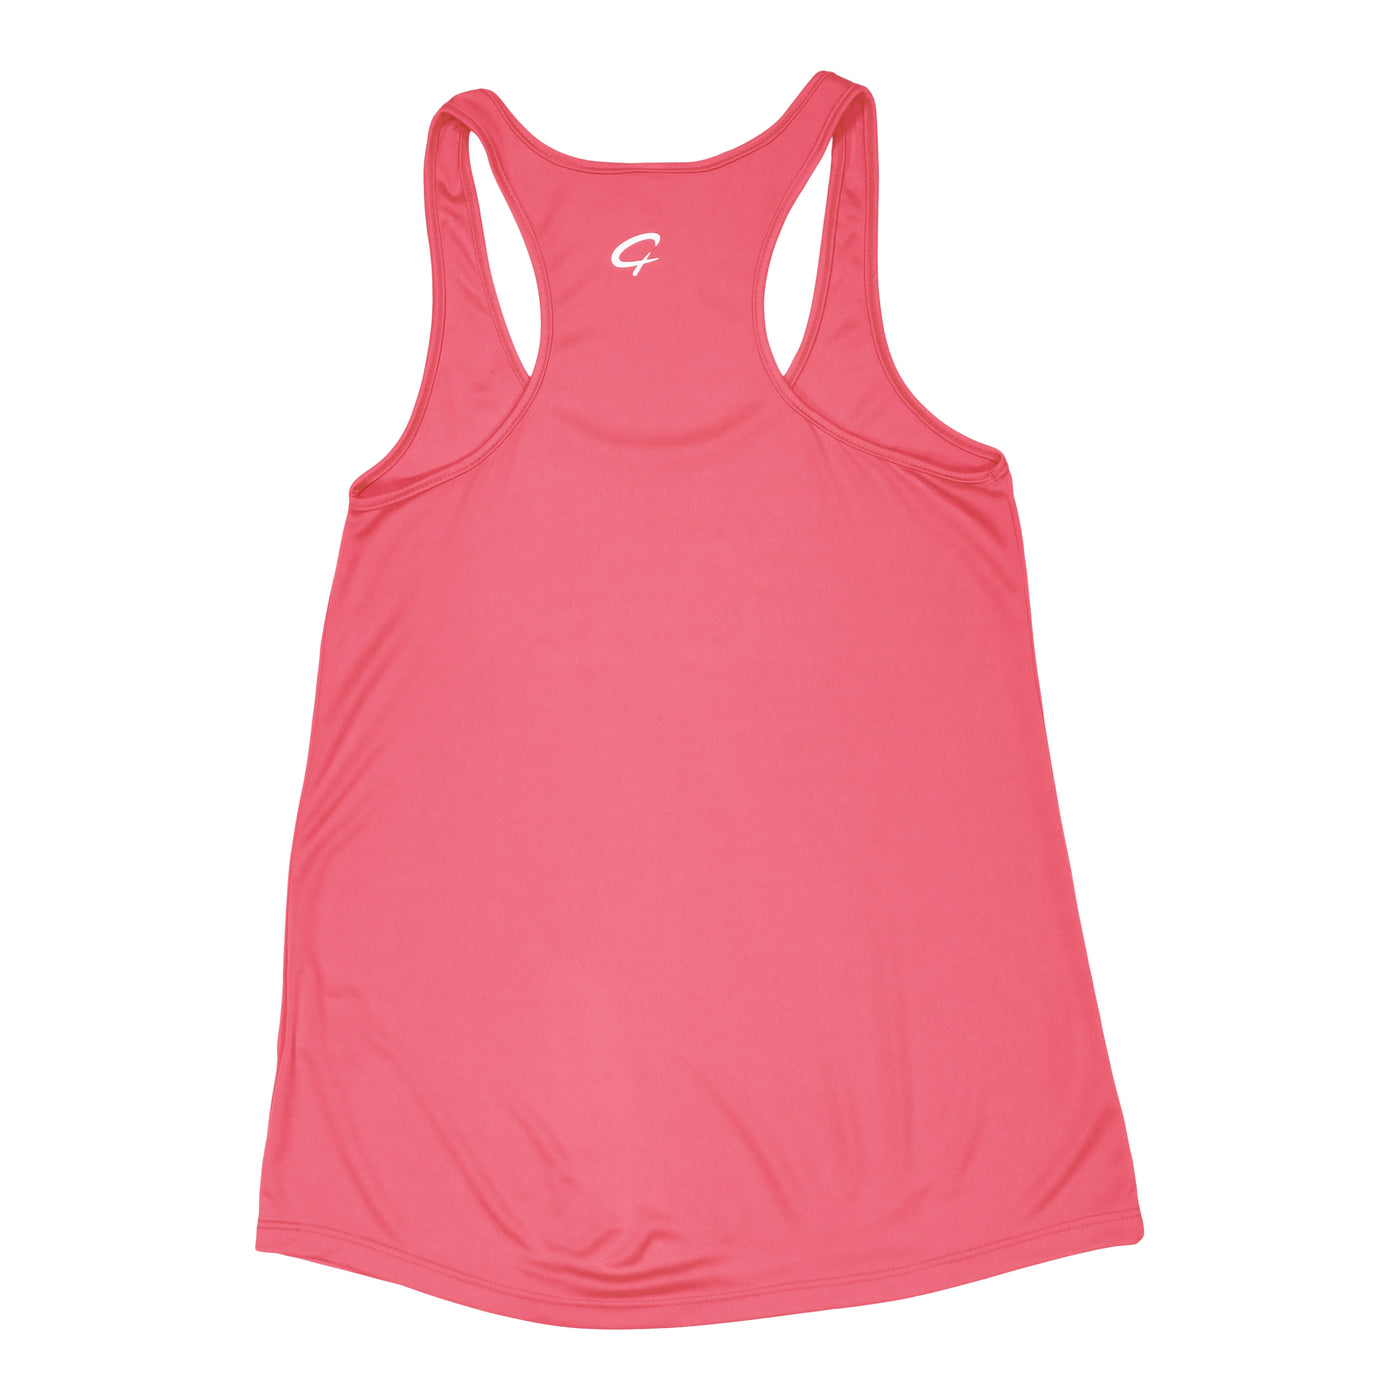 Created Women's Bold Performance coral tank top rear view